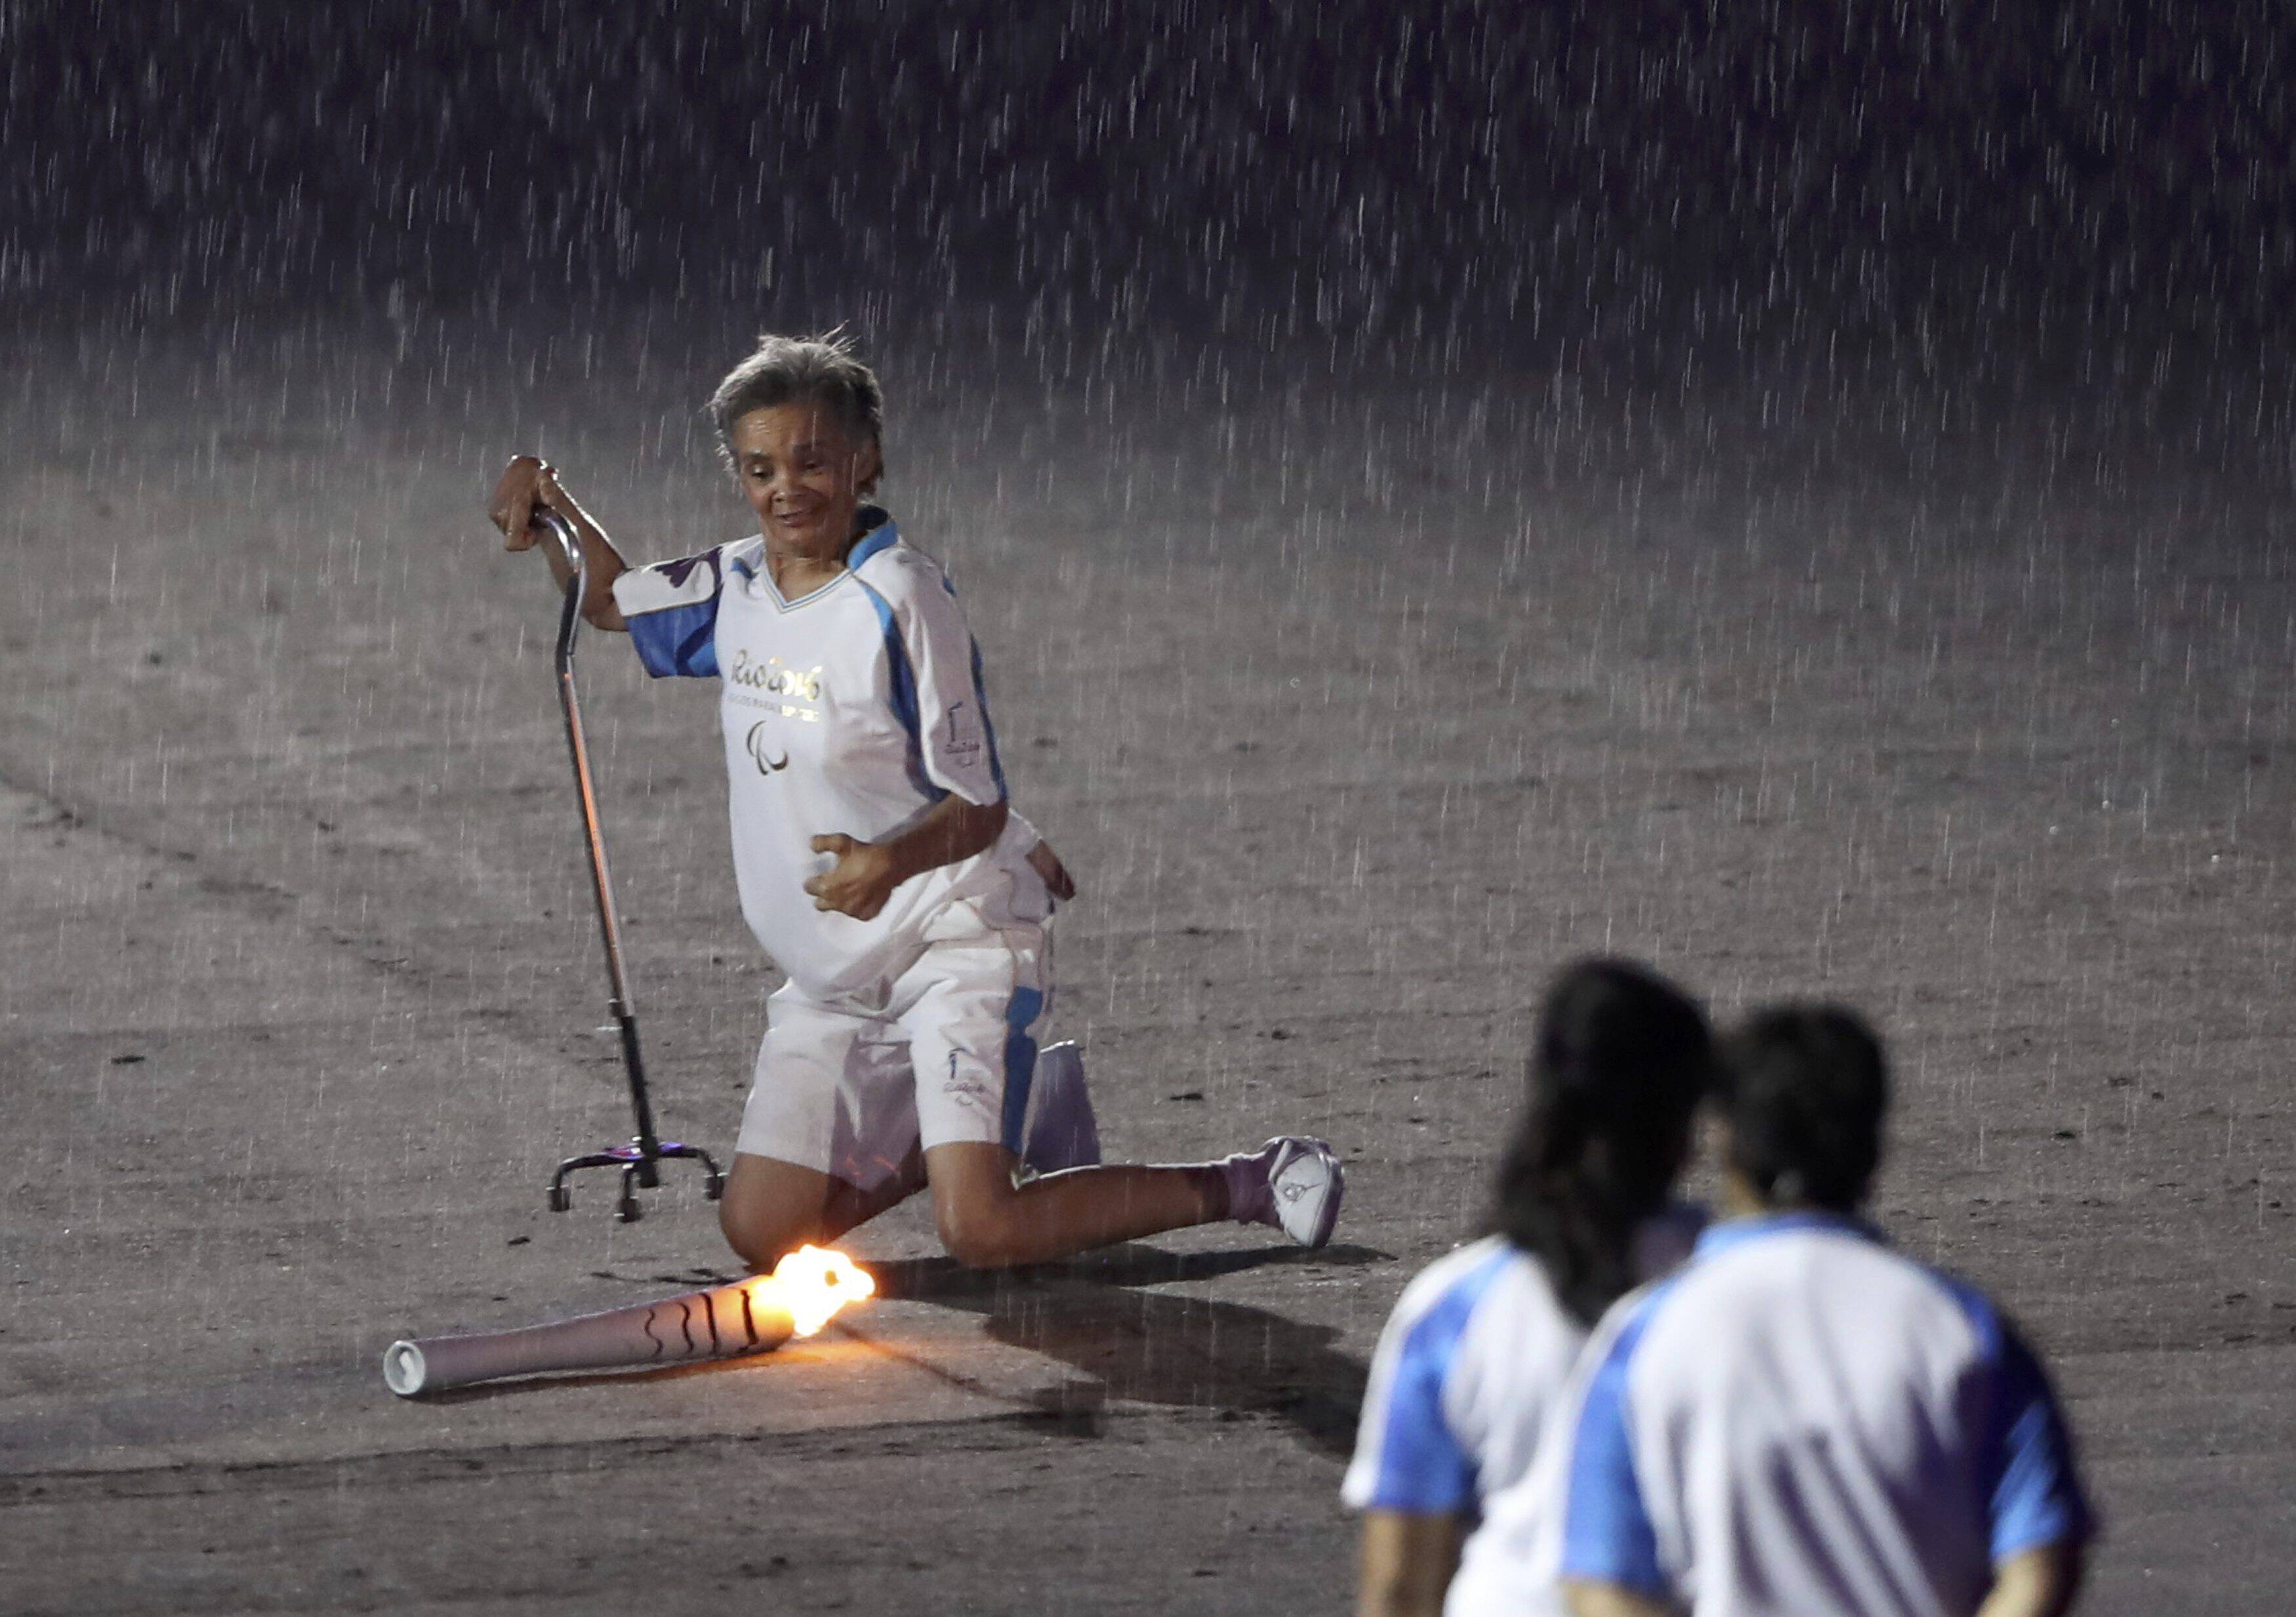 2016 Rio Paralympics - Opening ceremony - Maracana - Rio de Janeiro, Brazil - 07/09/2016. Brazilian Paralympic runner Marcia Malsar falls while carrying the torch as rain falls during the opening ceremony. REUTERS/Ueslei Marcelino FOR EDITORIAL USE ONLY. NOT FOR SALE FOR MARKETING OR ADVERTISING CAMPAIGNS.